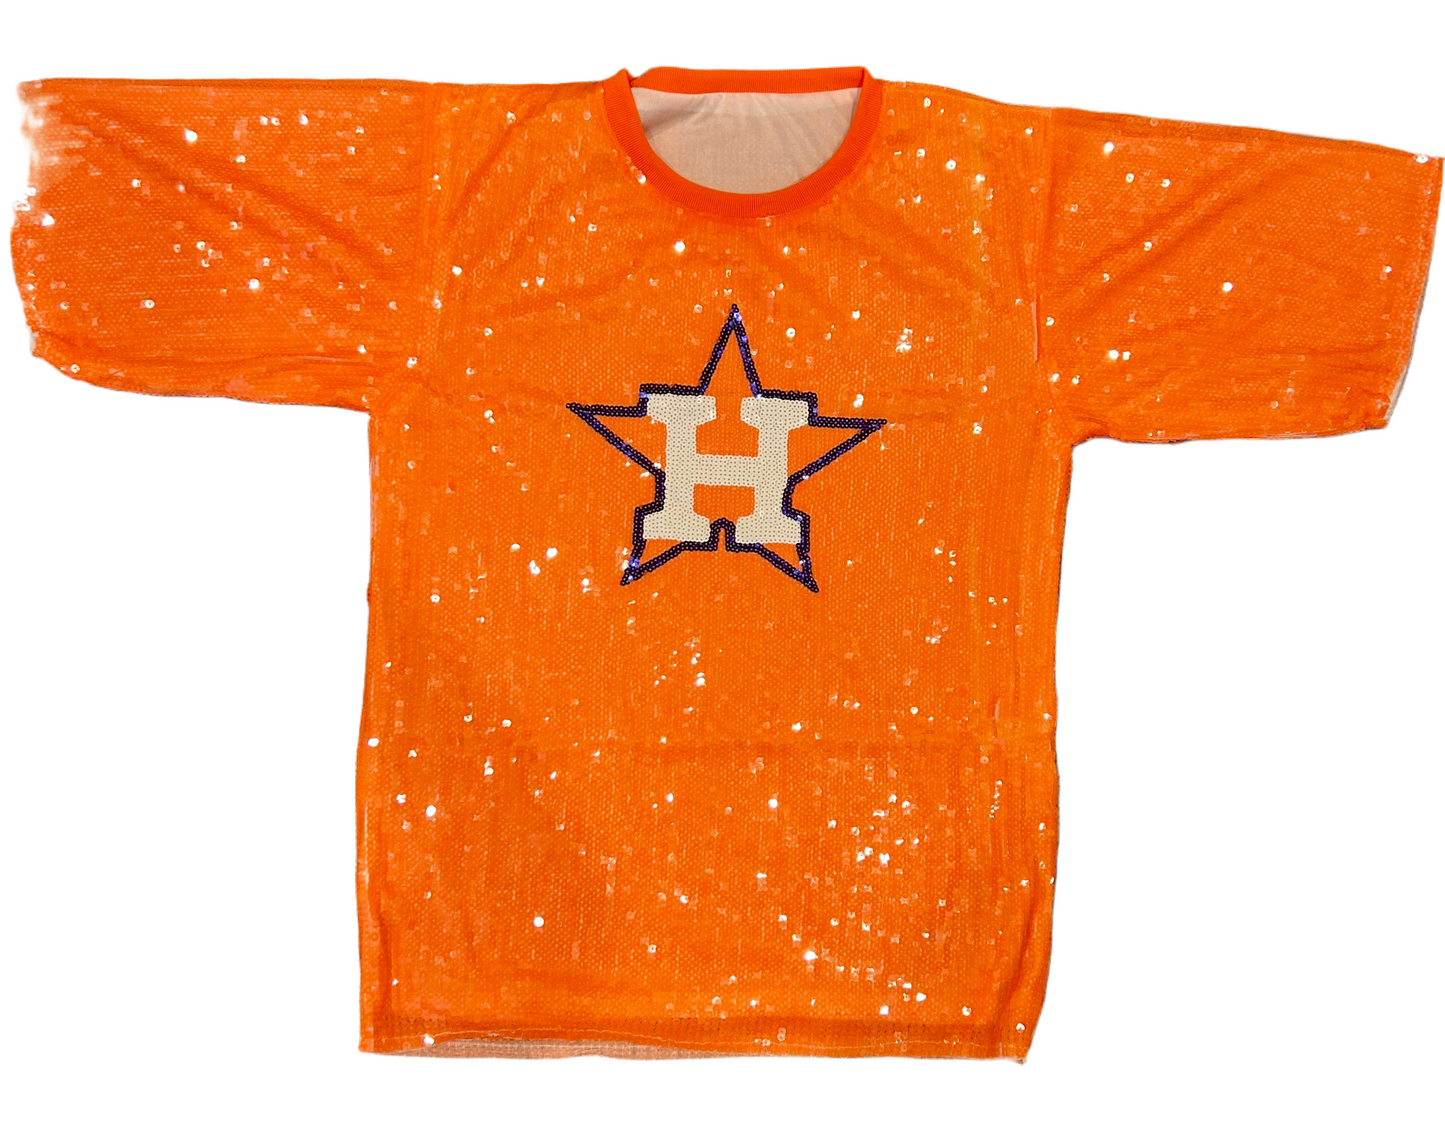 Astros 1 size fits most bling tee blue, retro & orange